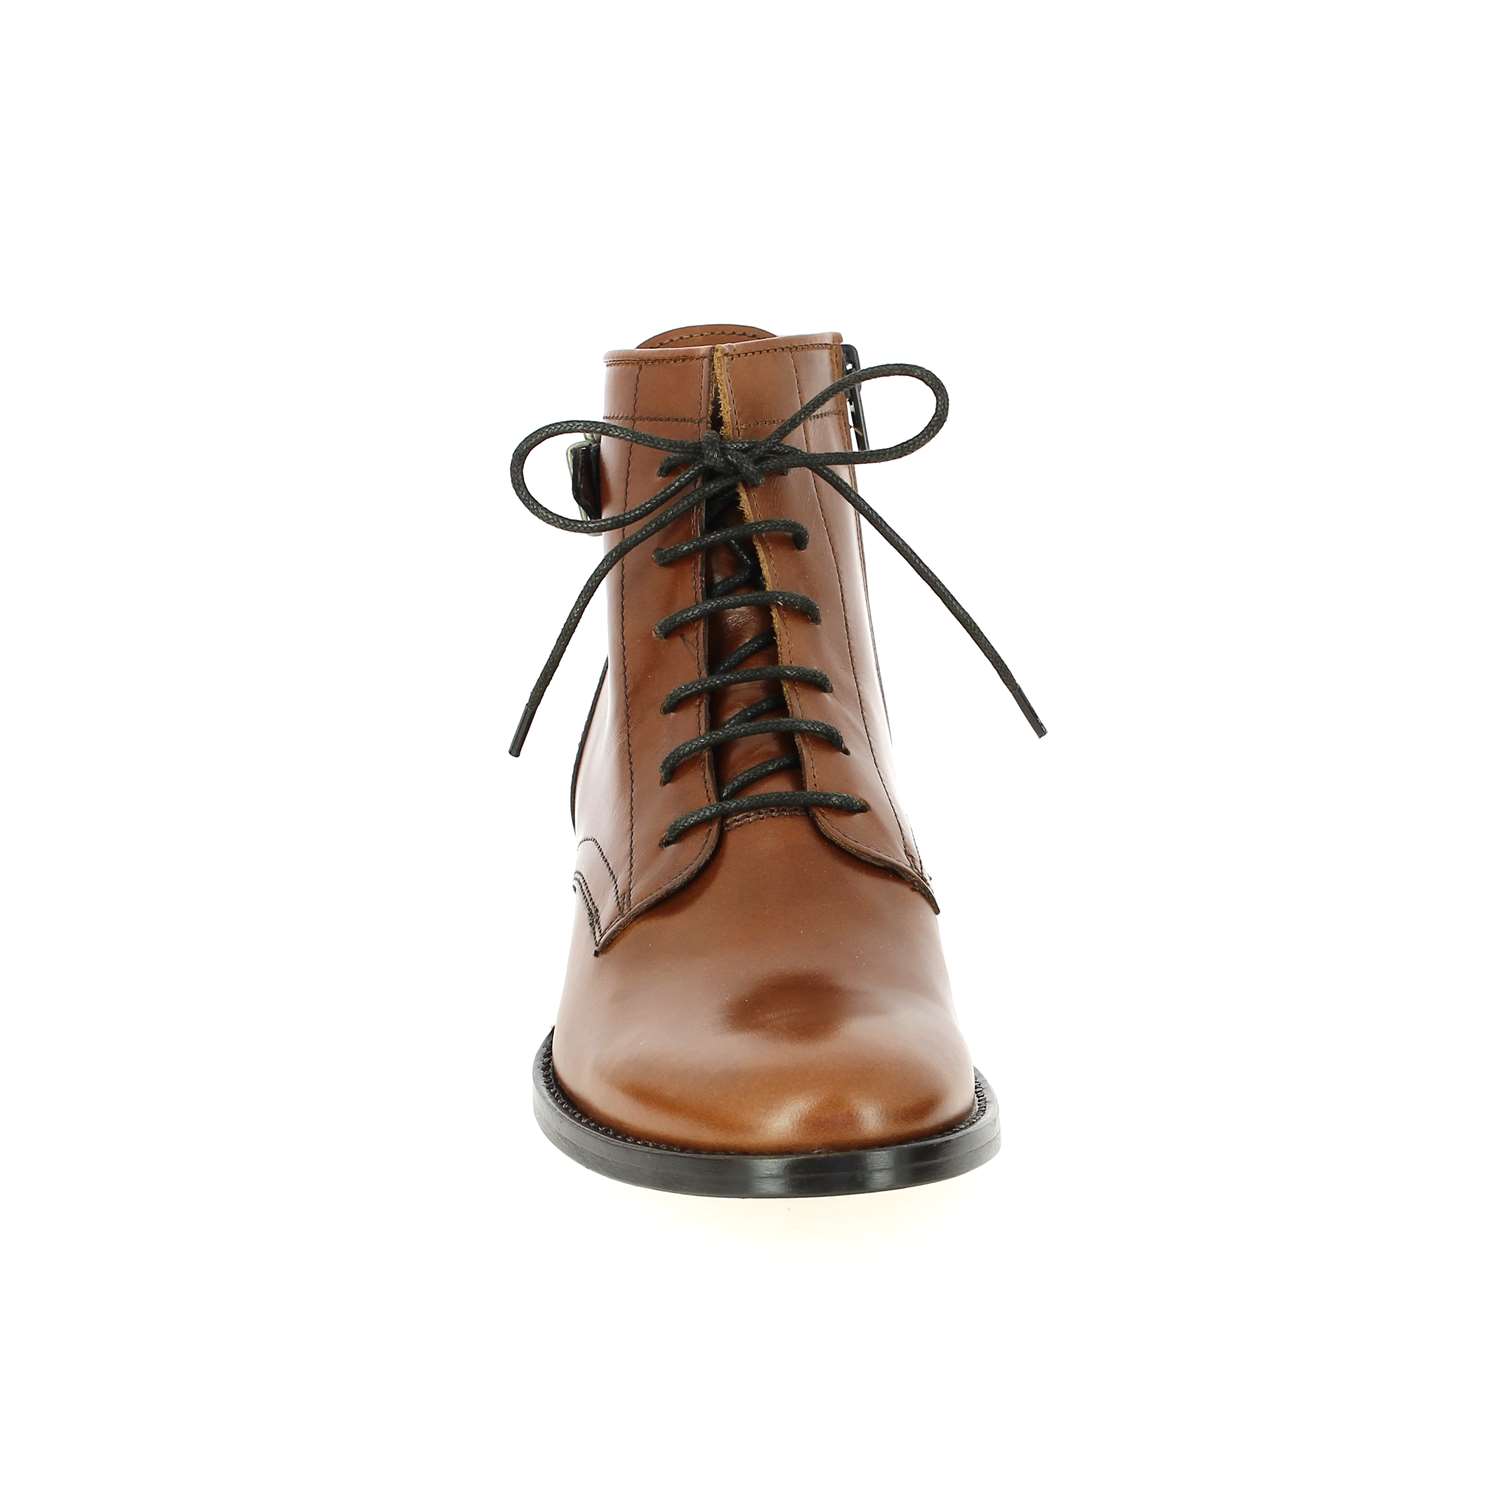 03 - ABY - MURATTI - Boots et bottines - Cuir